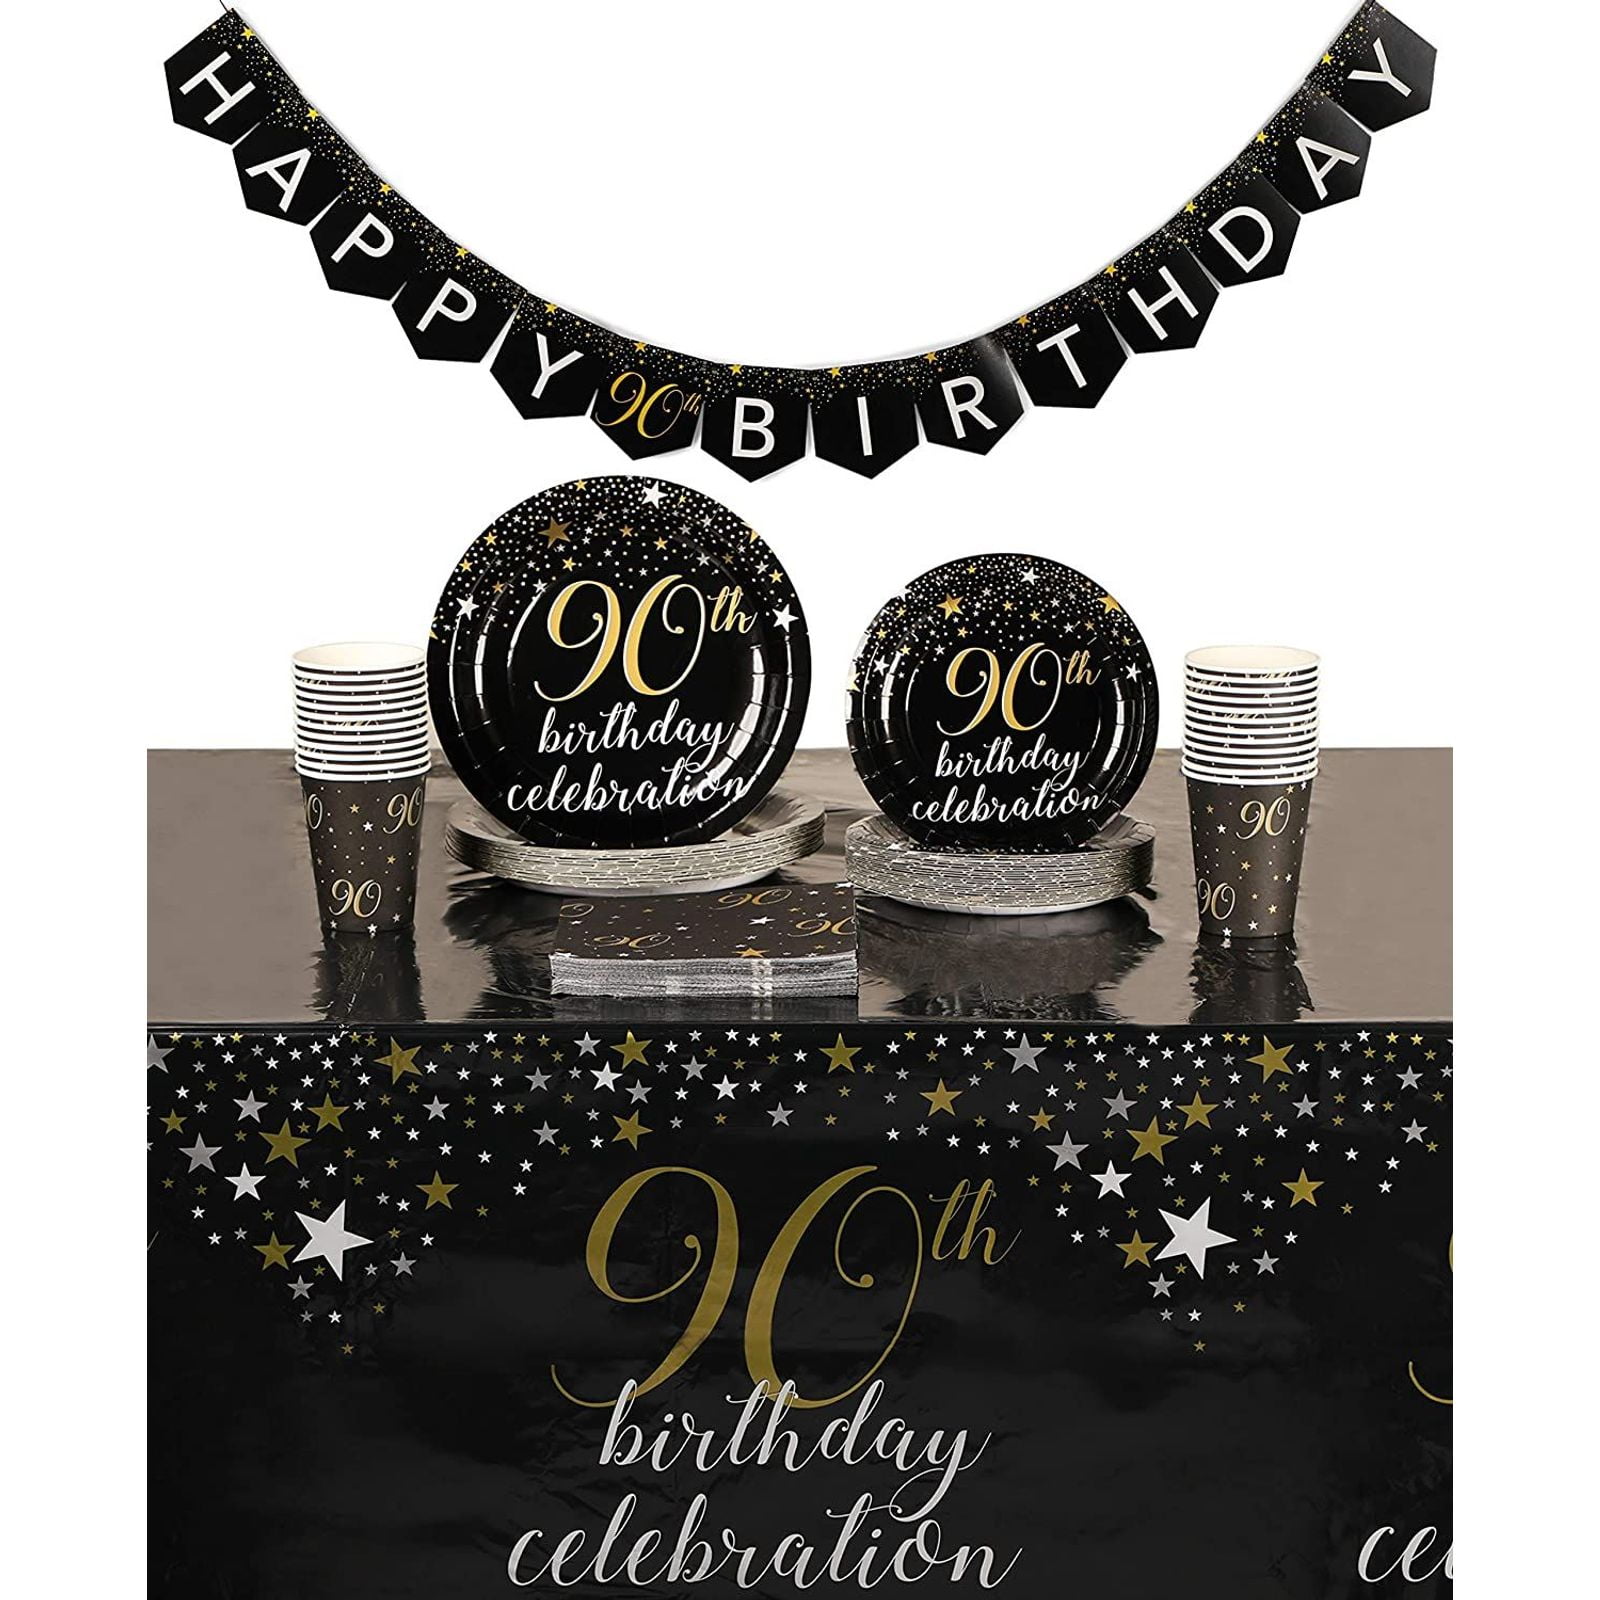 Happy 90th Birthday Bday PARTY ITEMS Decorations Tableware BLACK & GOLD Age 90 